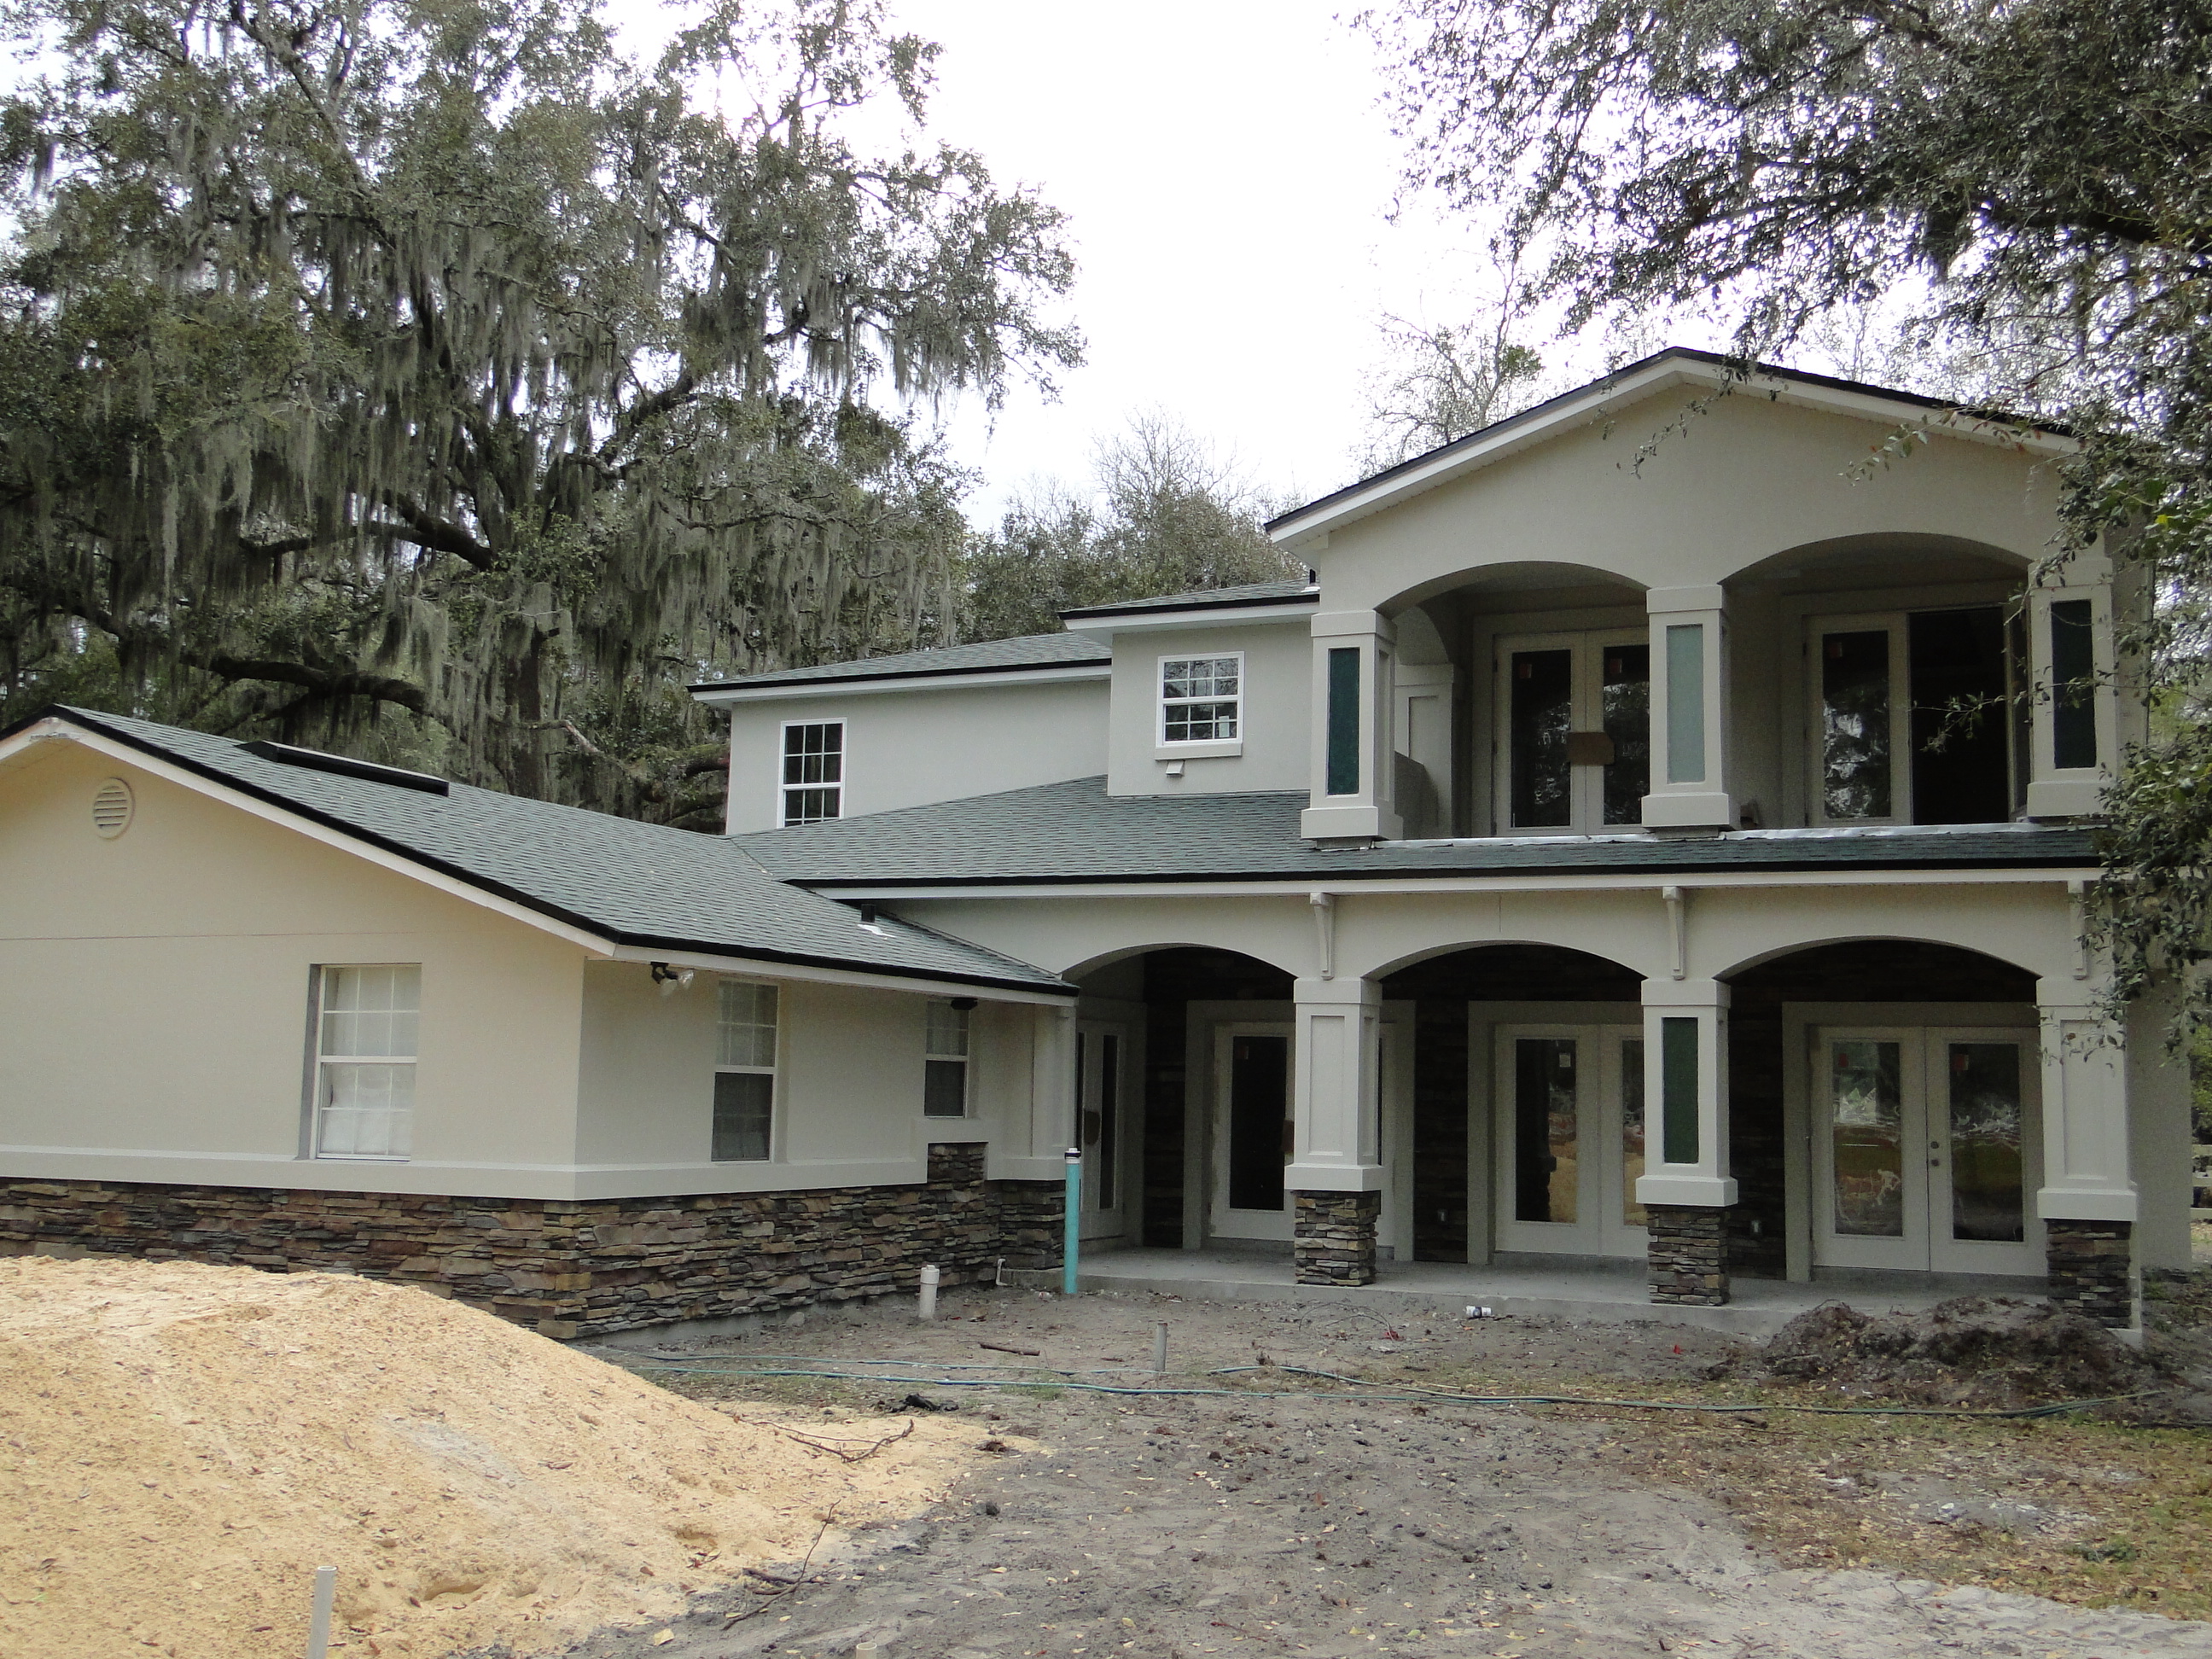 Rear Elevation After The Renovation Is Complete